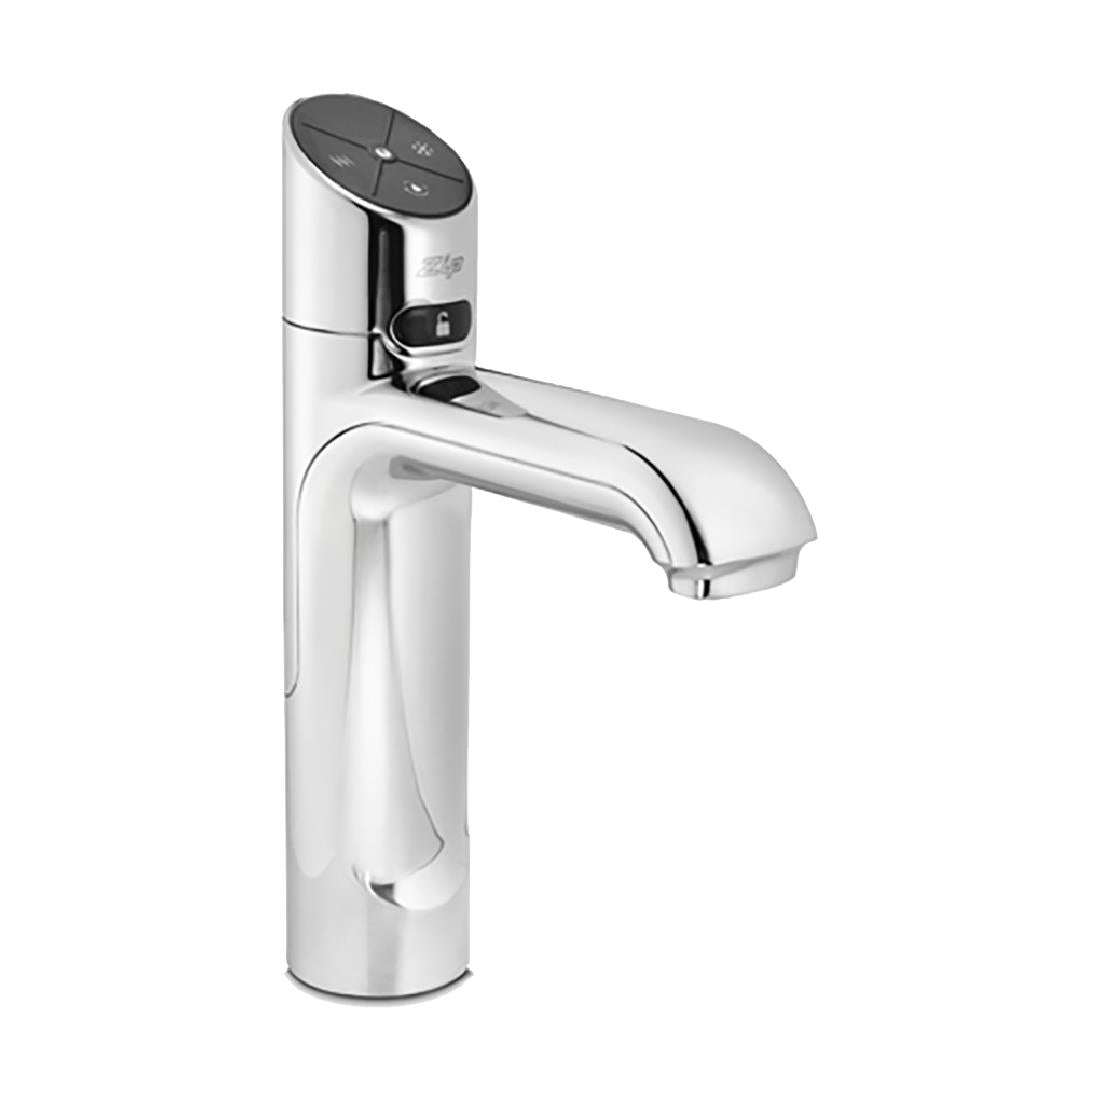 CX294 ZIP HydroTap G5 Classic Plus Boiling Chilled 240/175 Bright Chrome JD Catering Equipment Solutions Ltd